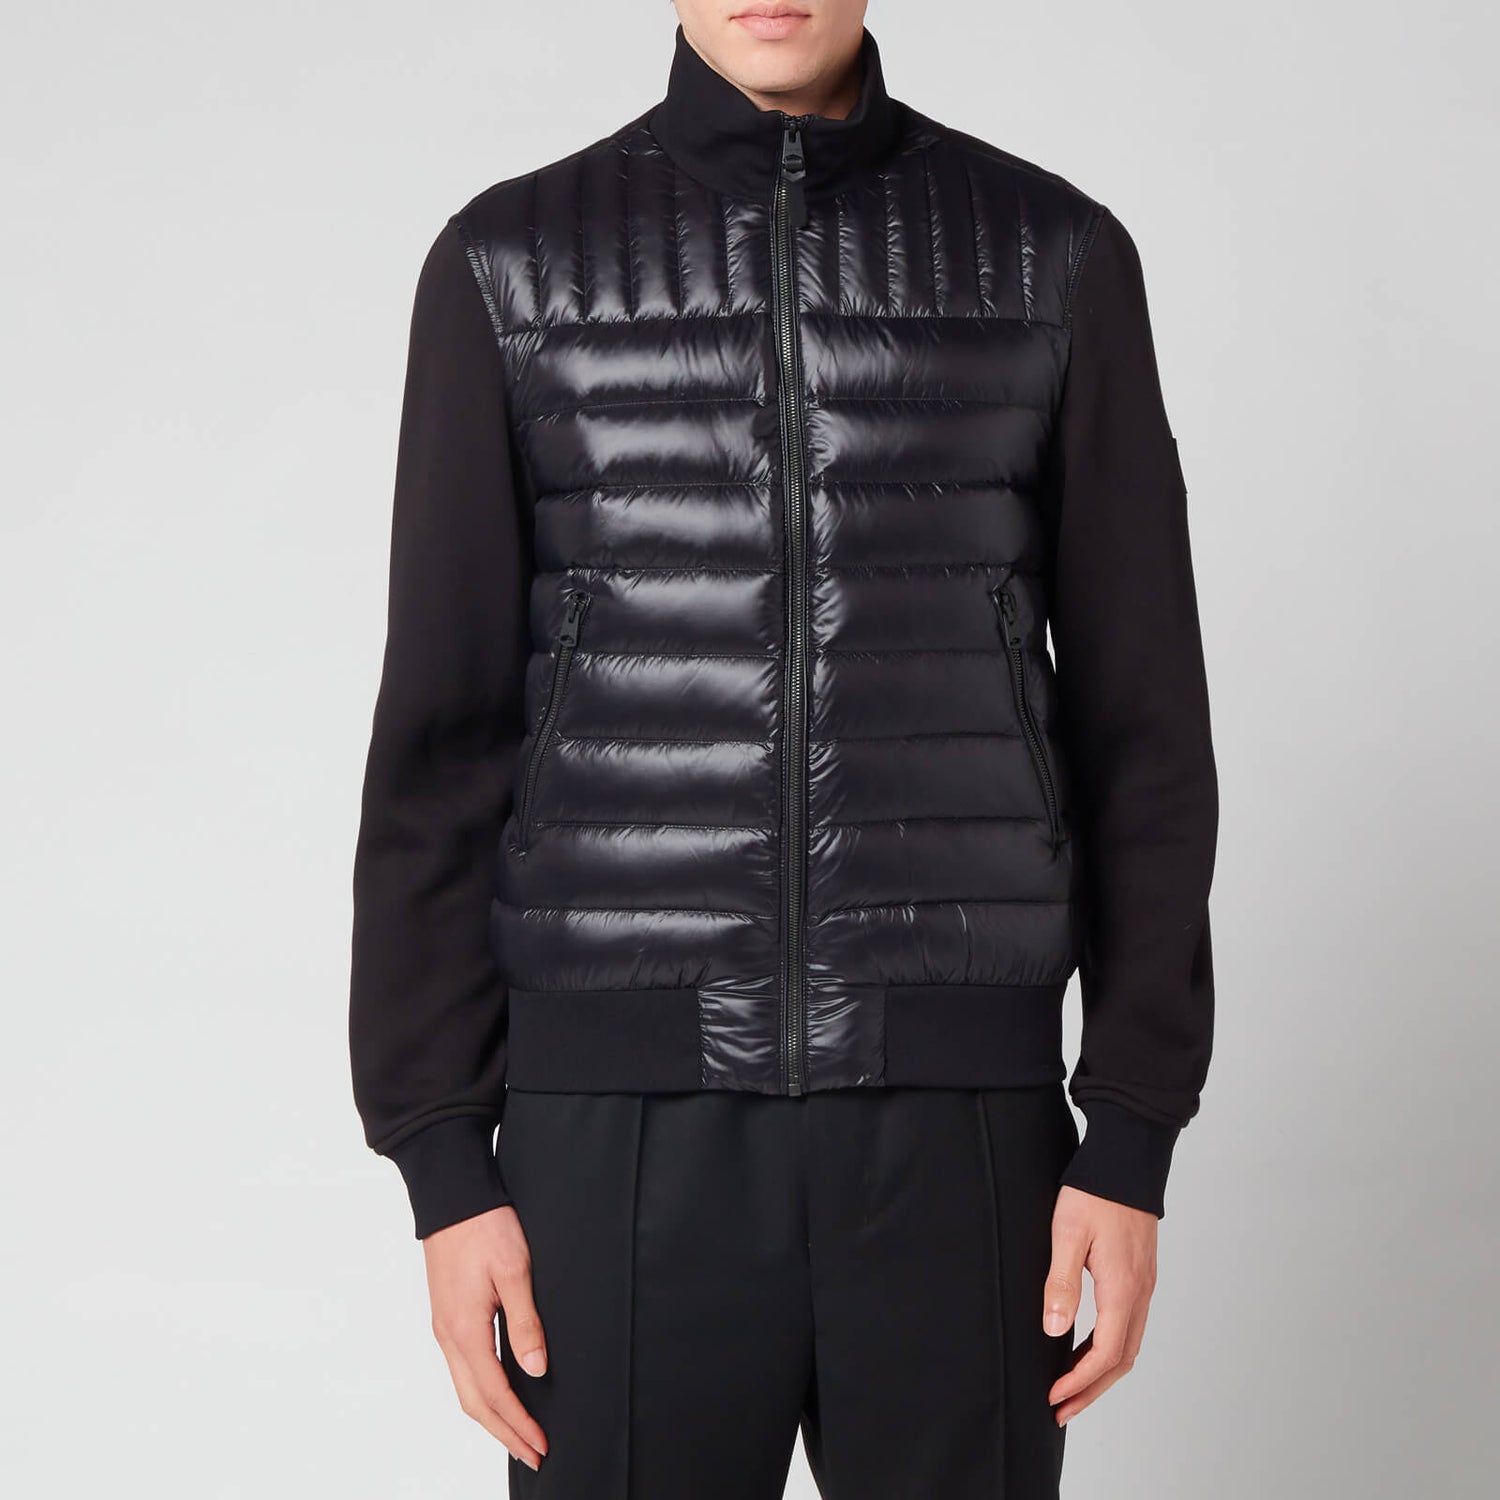 Mackage Men's Collin Bomber Jacket with Quilted Down Front Body - Black - S